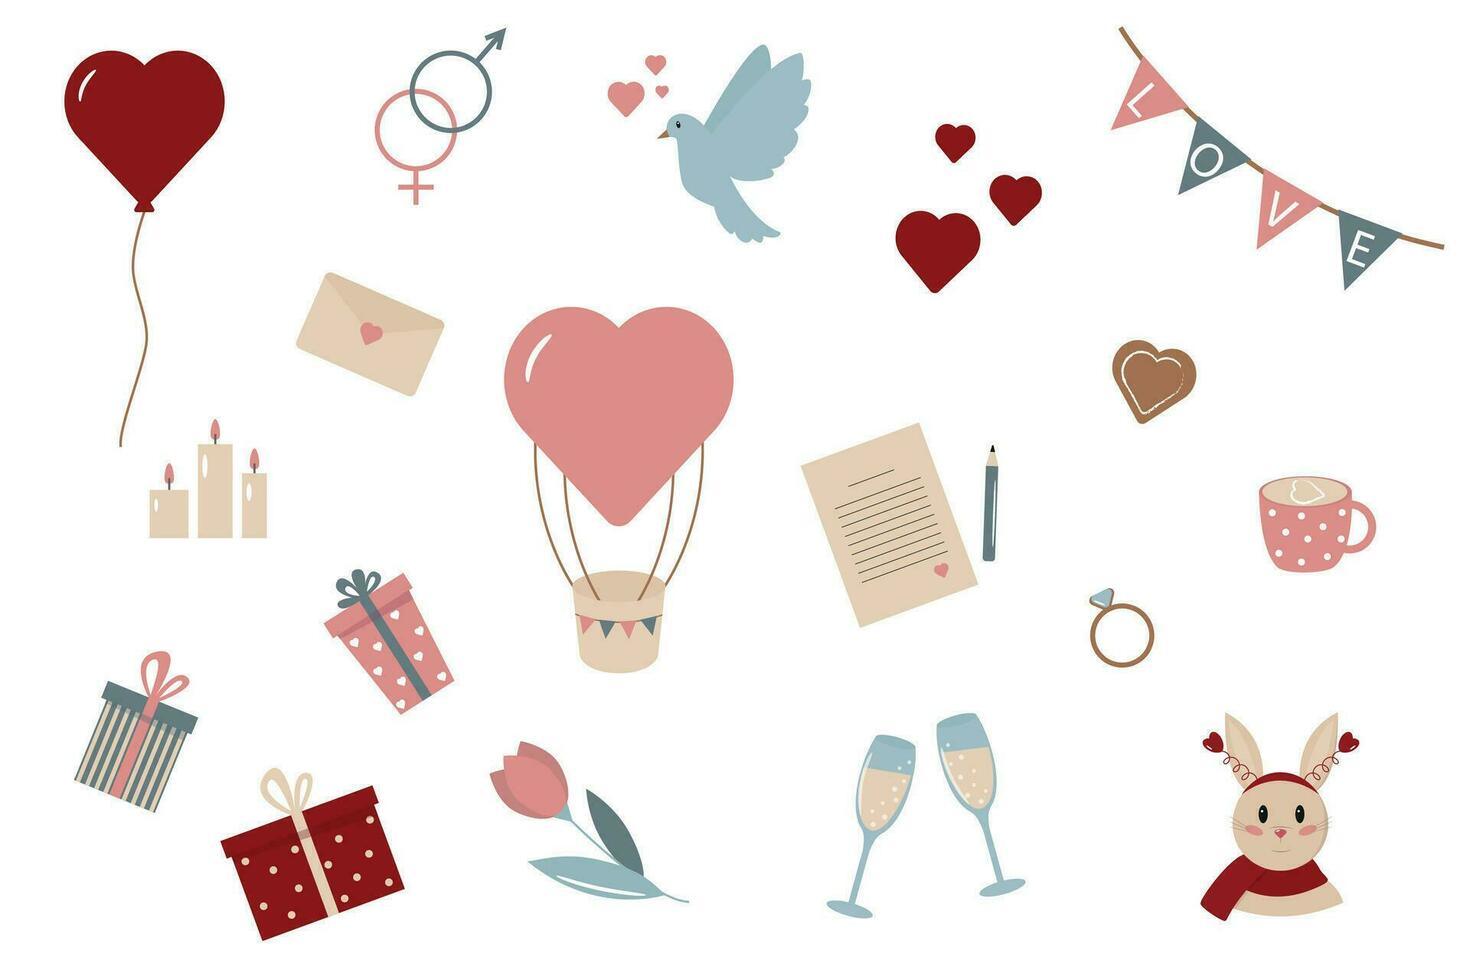 Set for Valentines day in flat style. Traditional symbols heart, ring, flower, gifts, balloon, pigeon, candles, glasses and others. Vector illustration